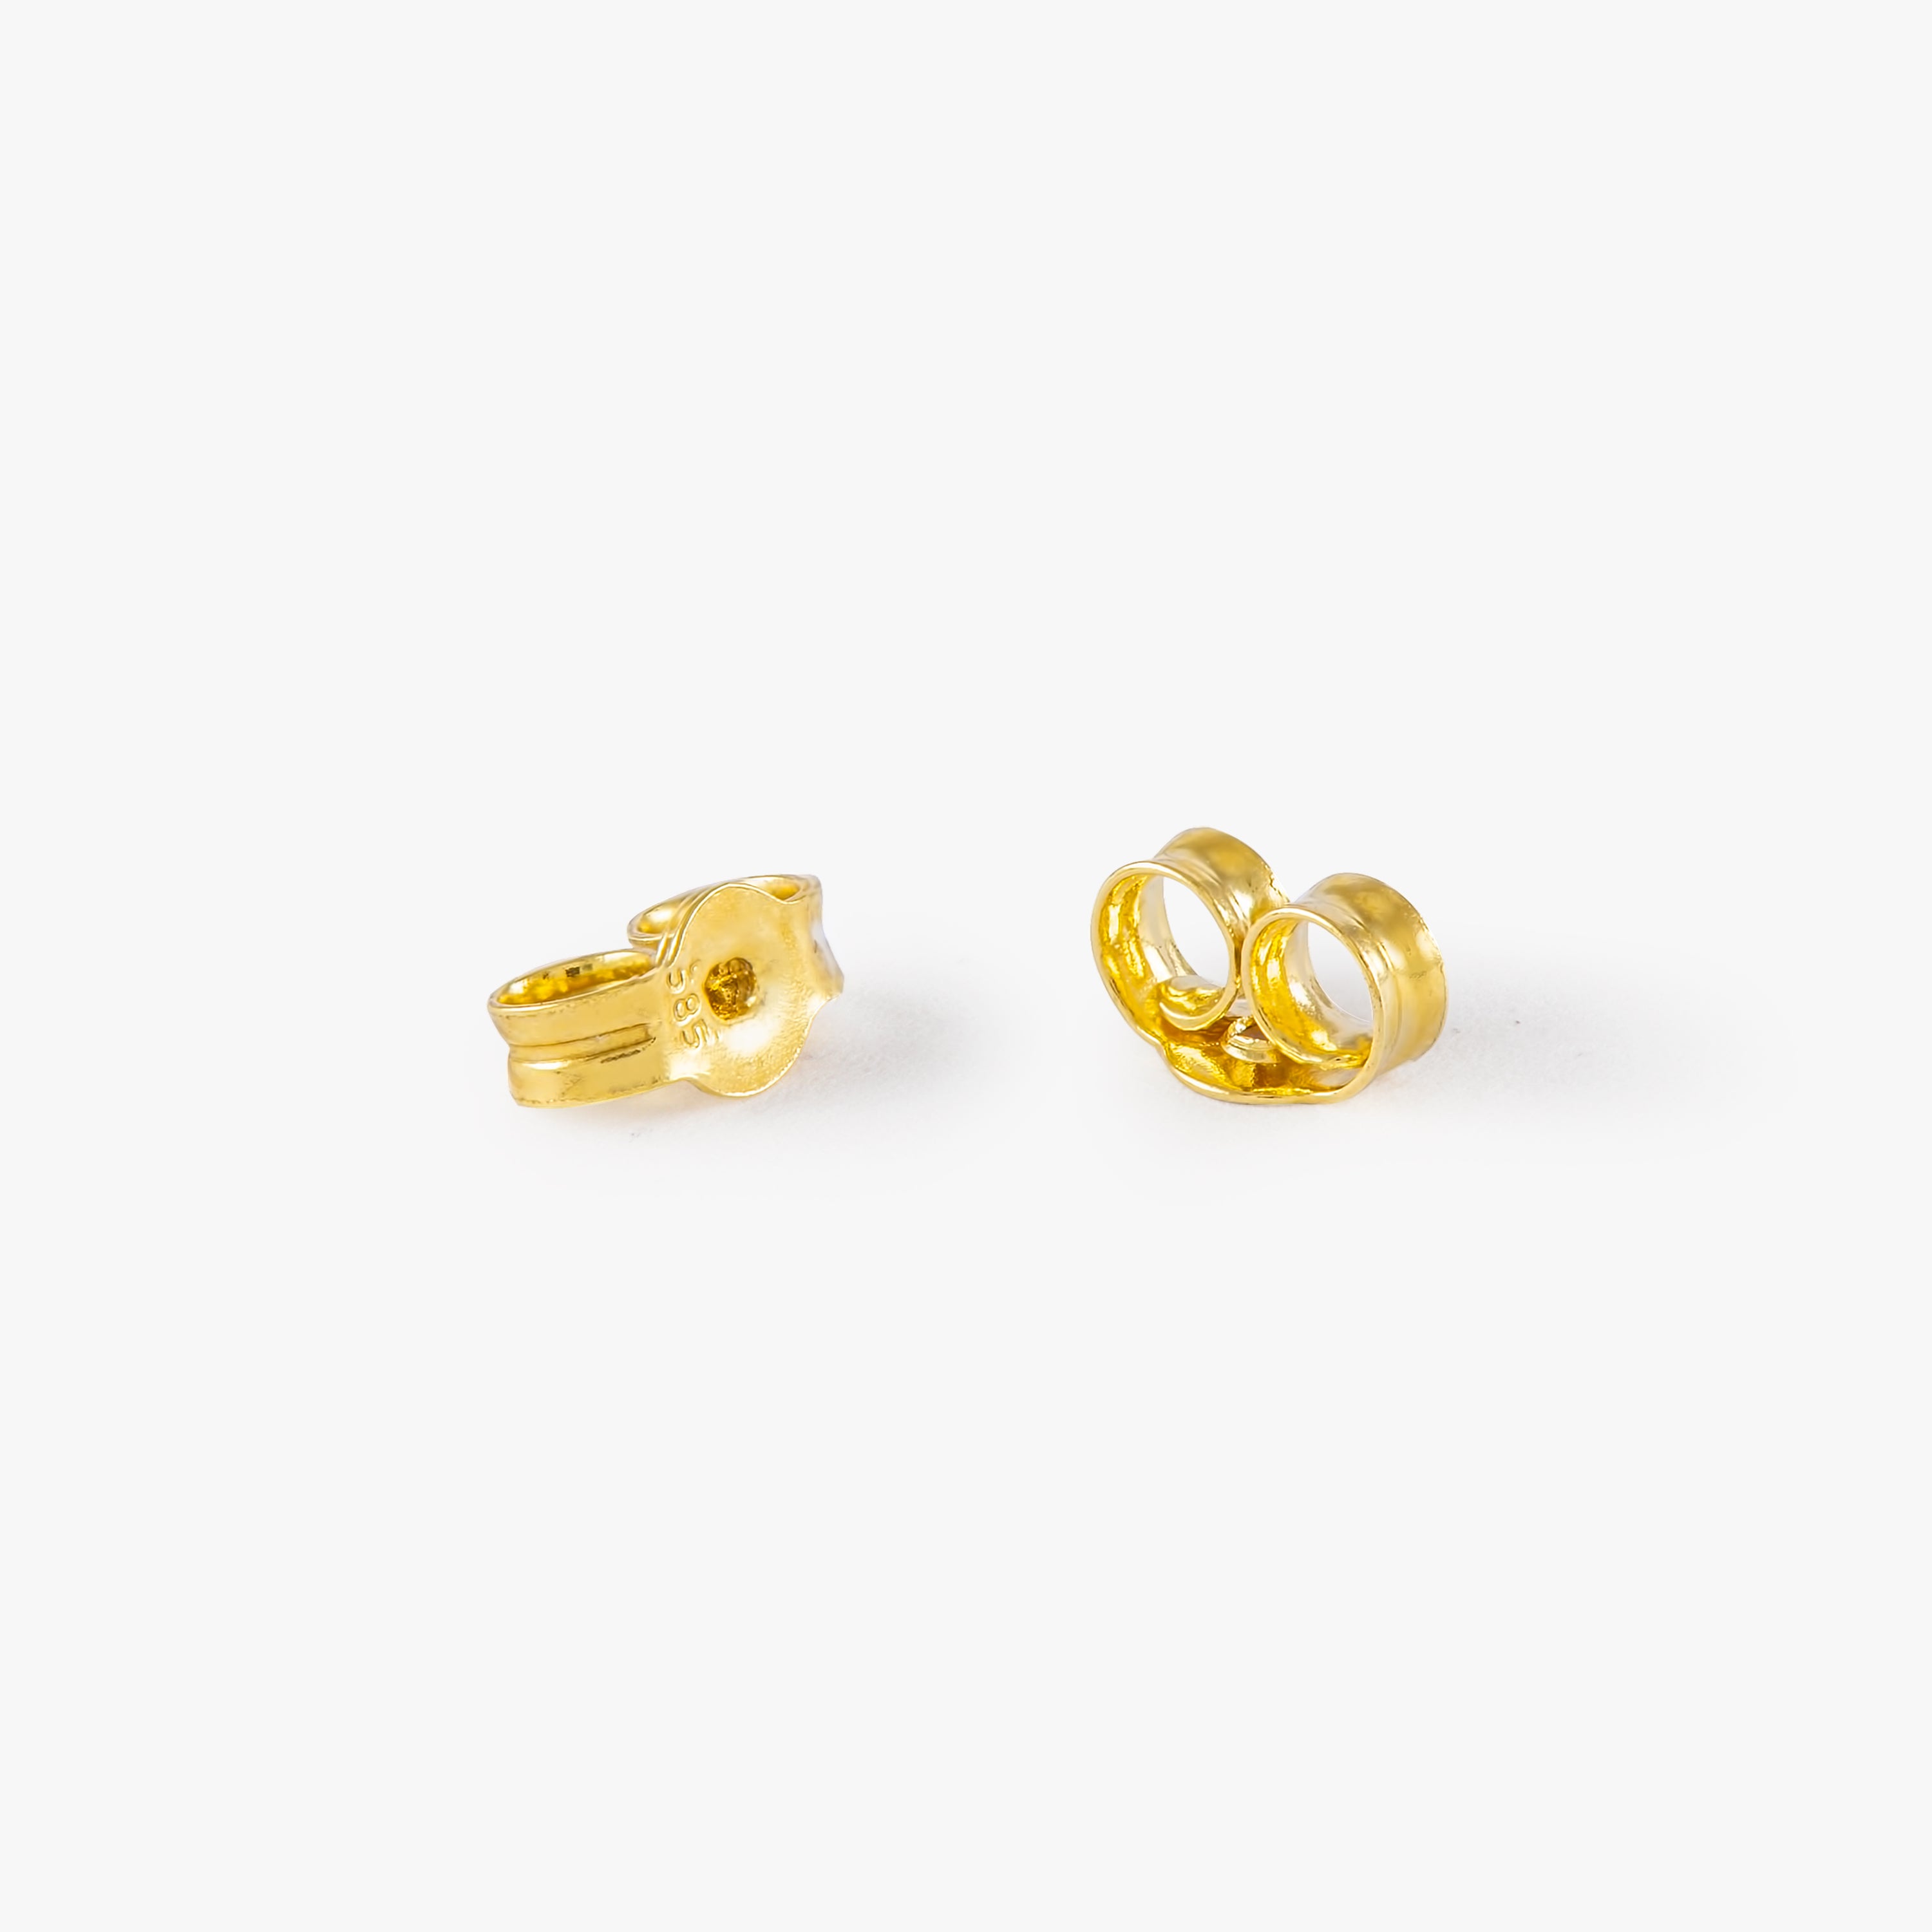 Marquise Chocolate Diamond Stud Earrings Available in 14K and 18K Gold